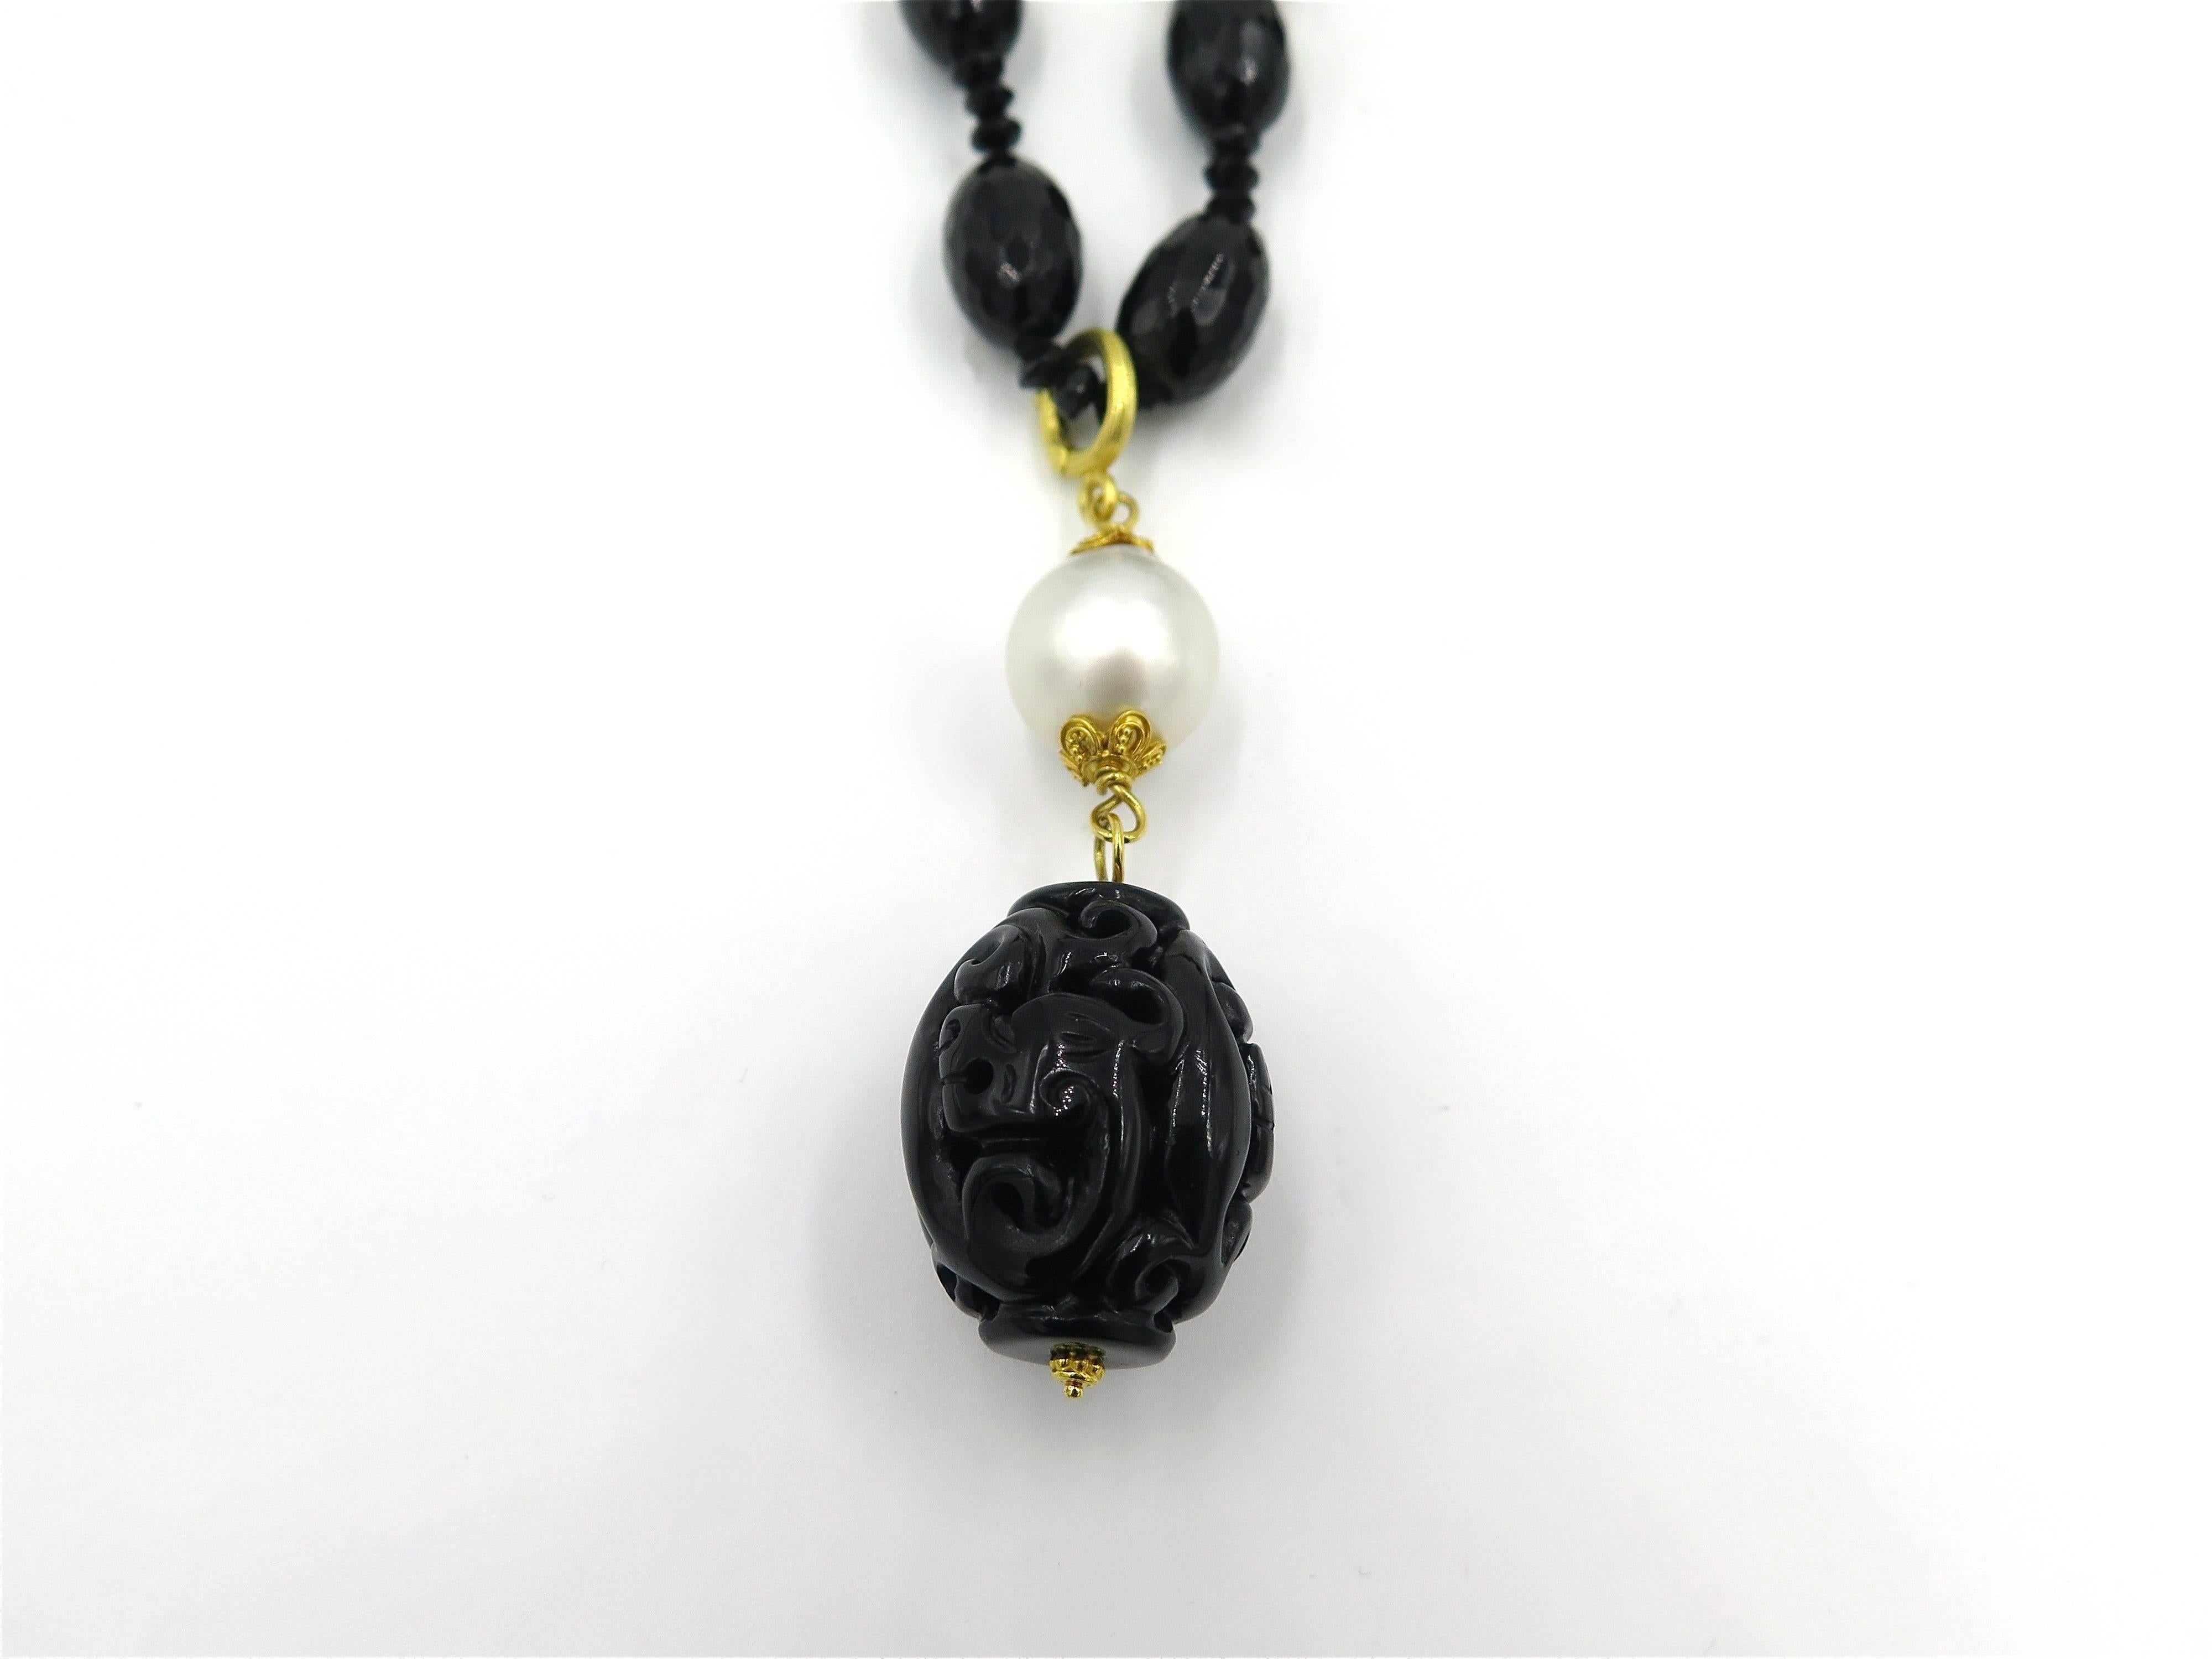 An 18 karat yellow gold, faceted and carved black onyx bead and baroque pearl necklace with detachable pendant, Verdura. The pearls measure approximately 10.00 to 14.00 mm.  The necklace has a gross weight of approximately 134.6 grams and measures